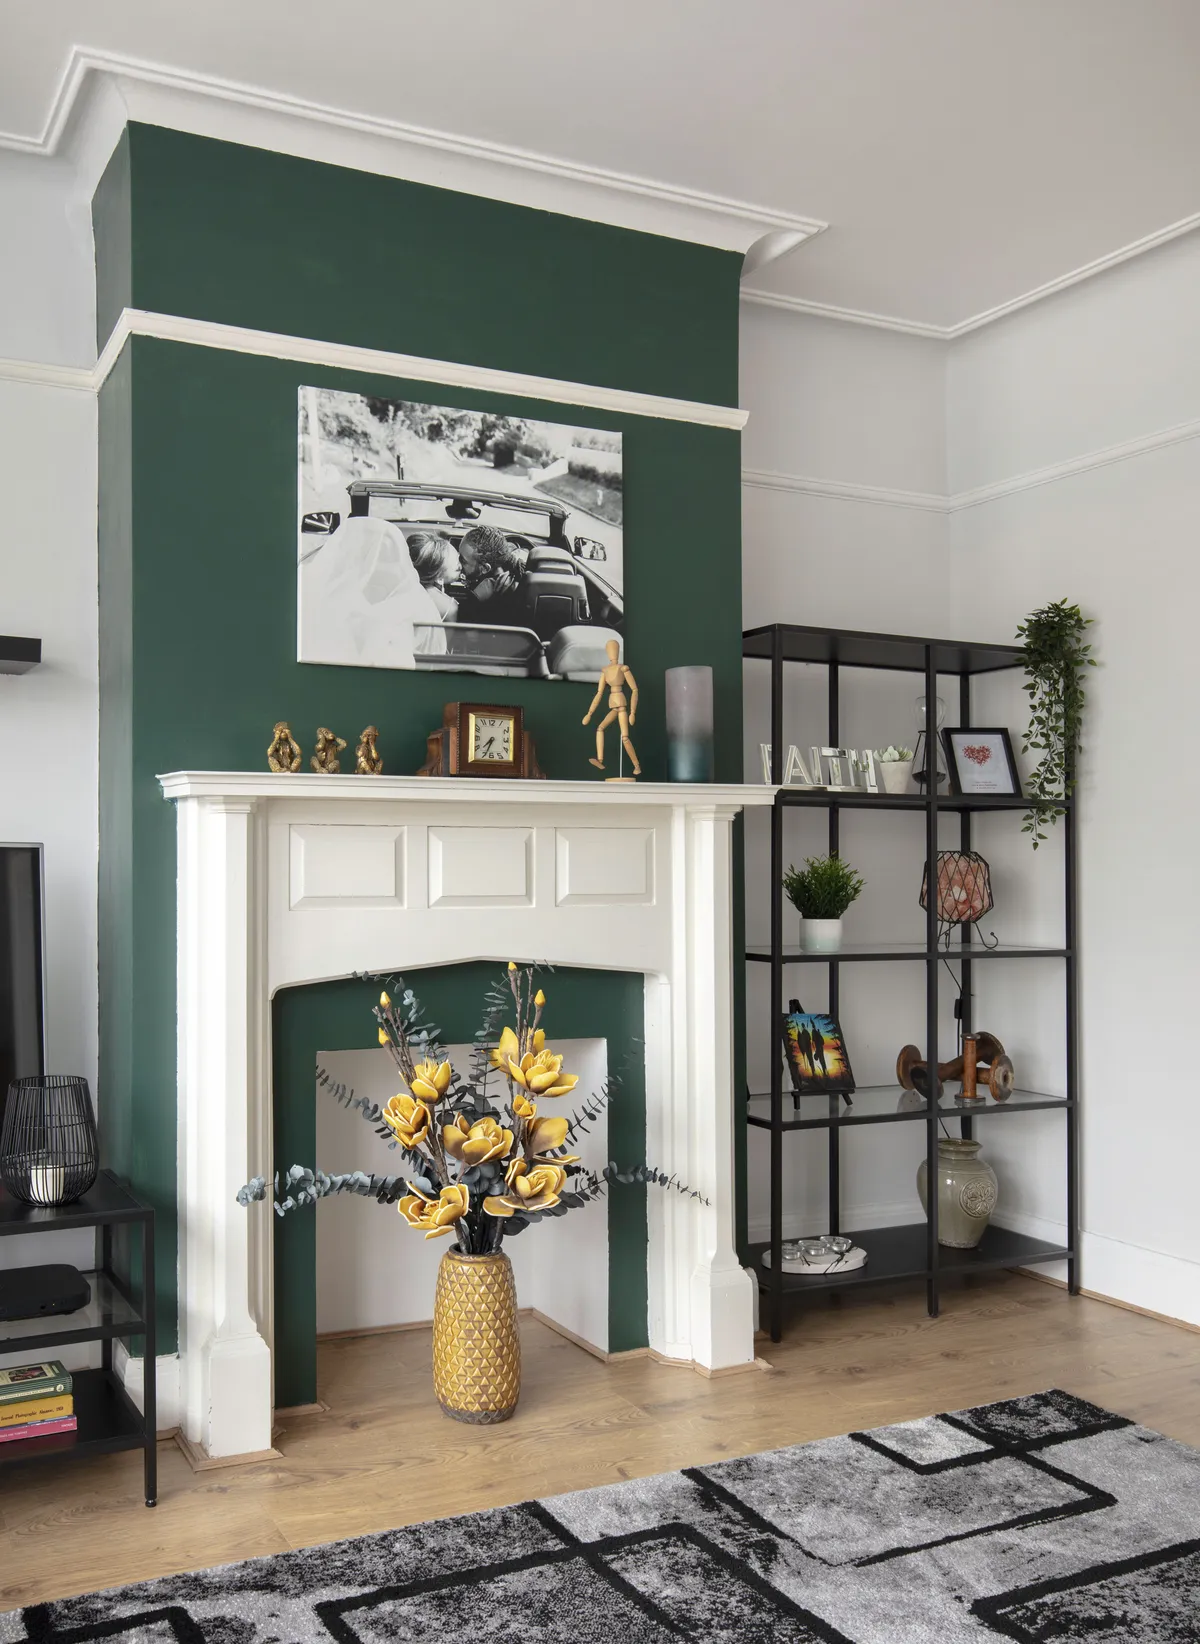 Diandra painted the chimney breast in Racer Green from Dulux, and added a canvas print of the couple in their wedding car. ‘This original fireplace was one of the reasons I fell in love with this house,’ she explains. ‘We’re saving up to put in a working fire one day’